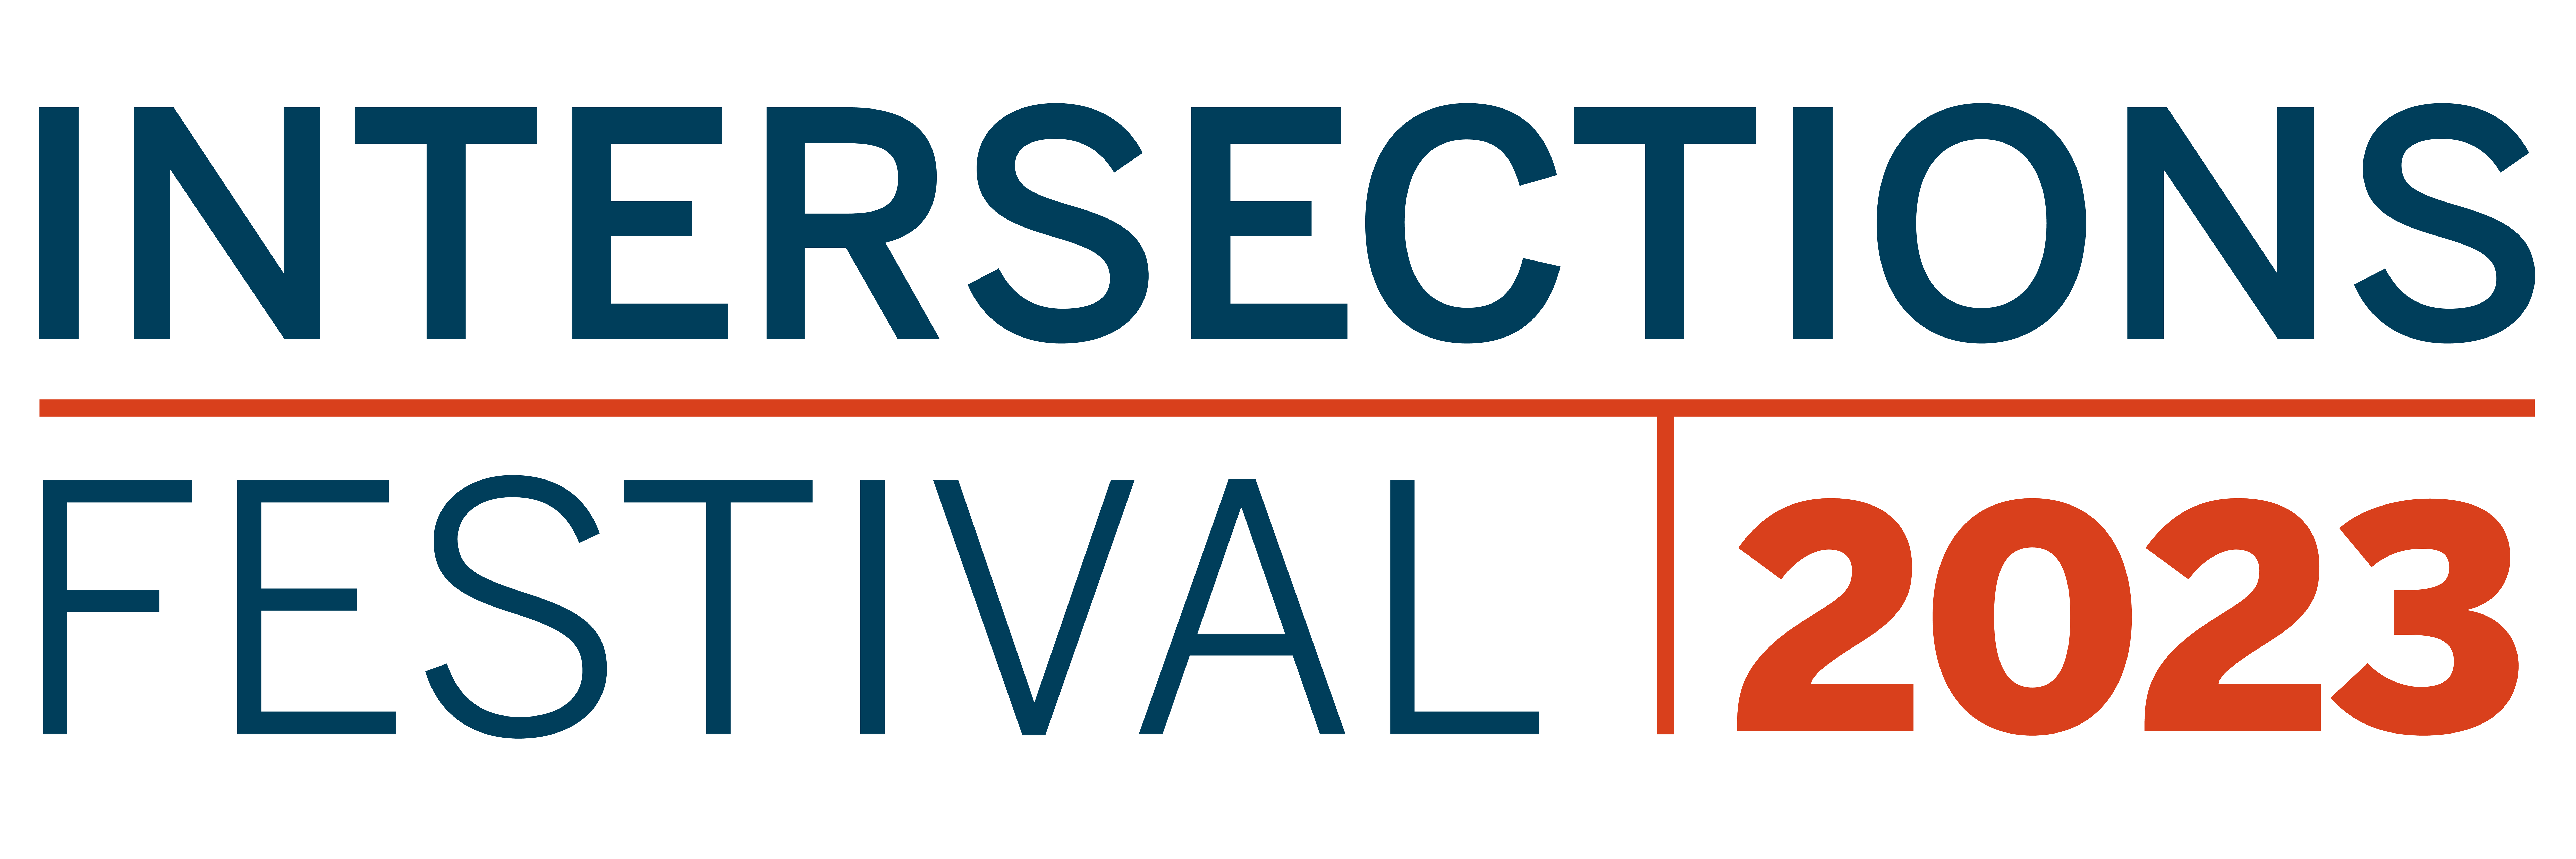 Intersections 2023 Festival Logo